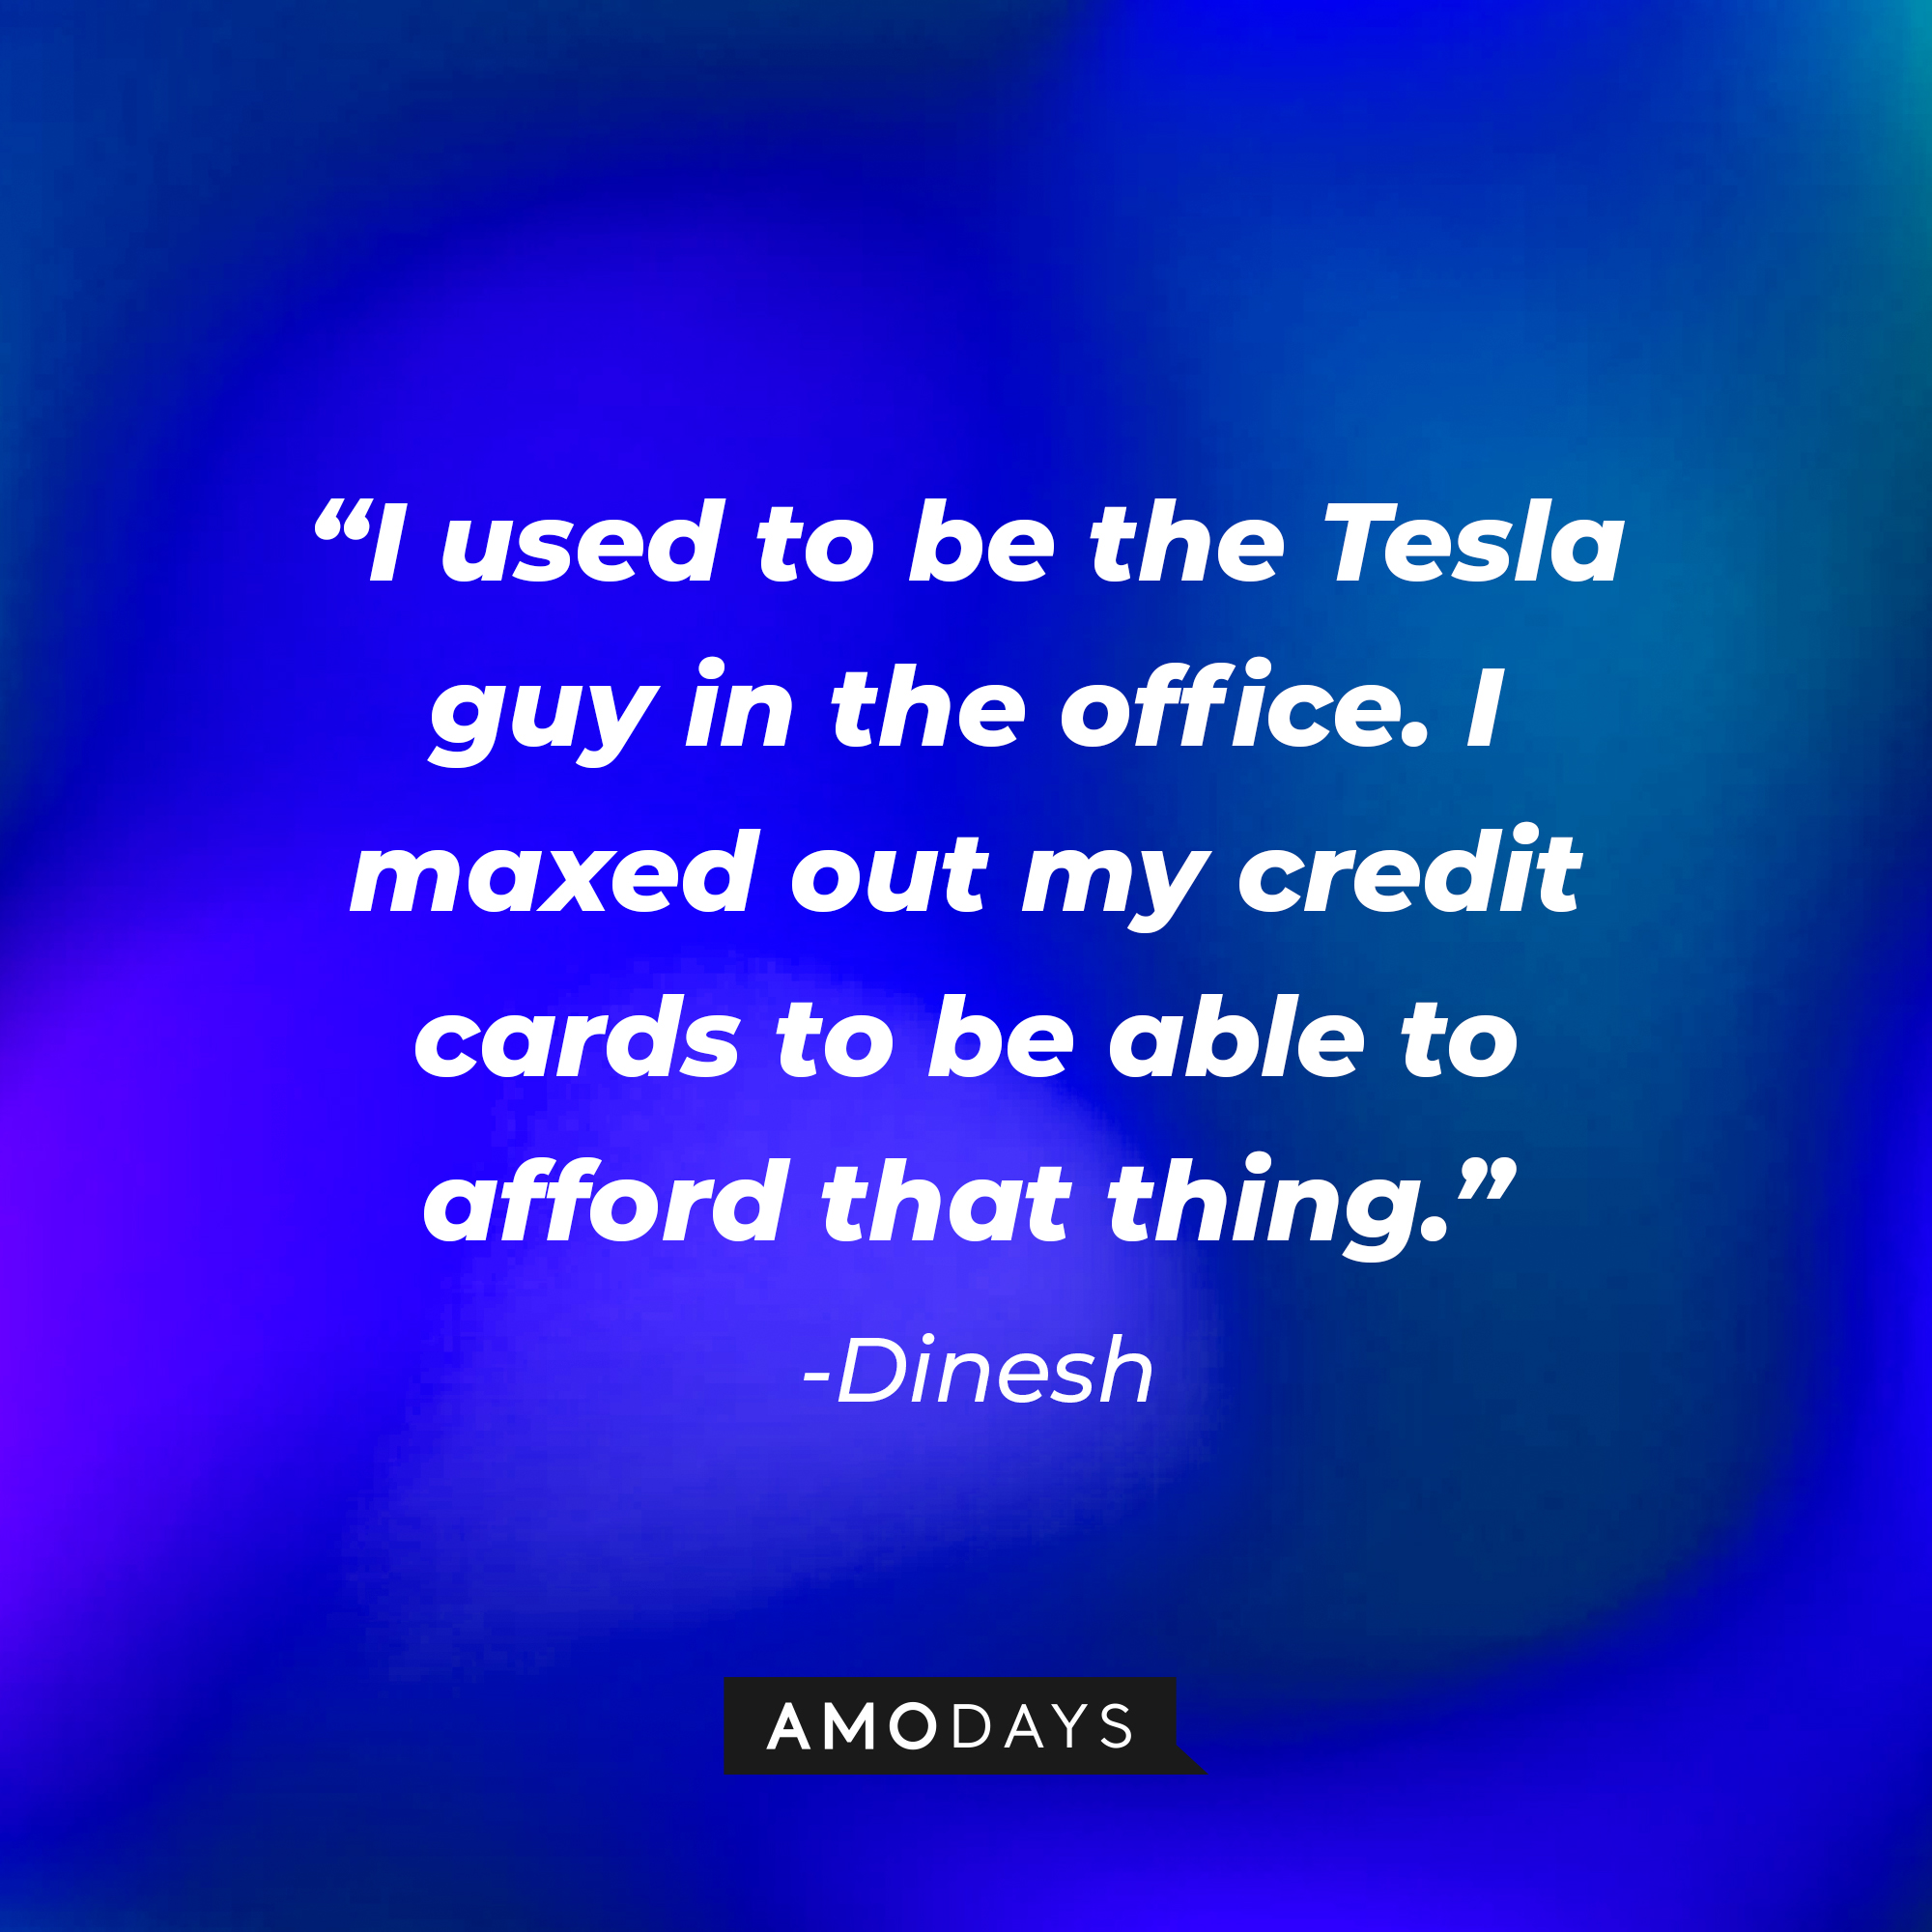 Dinesh's quote: “I used to be the Tesla guy in the office. I maxed out my credit cards to be able to afford that thing.” | Source: Amodays